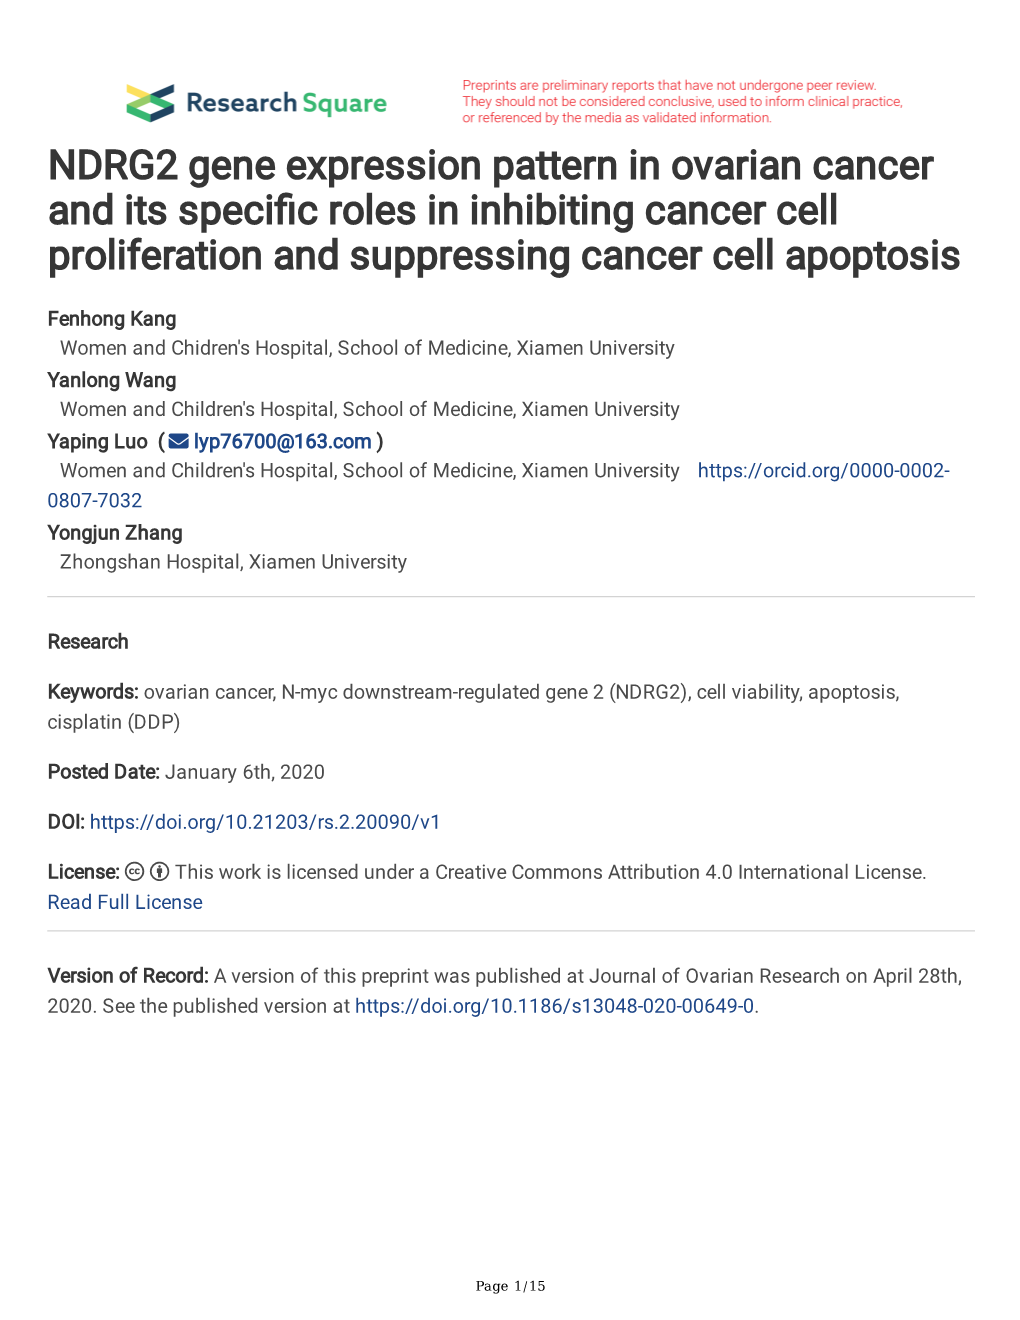 NDRG2 Gene Expression Pattern in Ovarian Cancer and Its Specific Roles